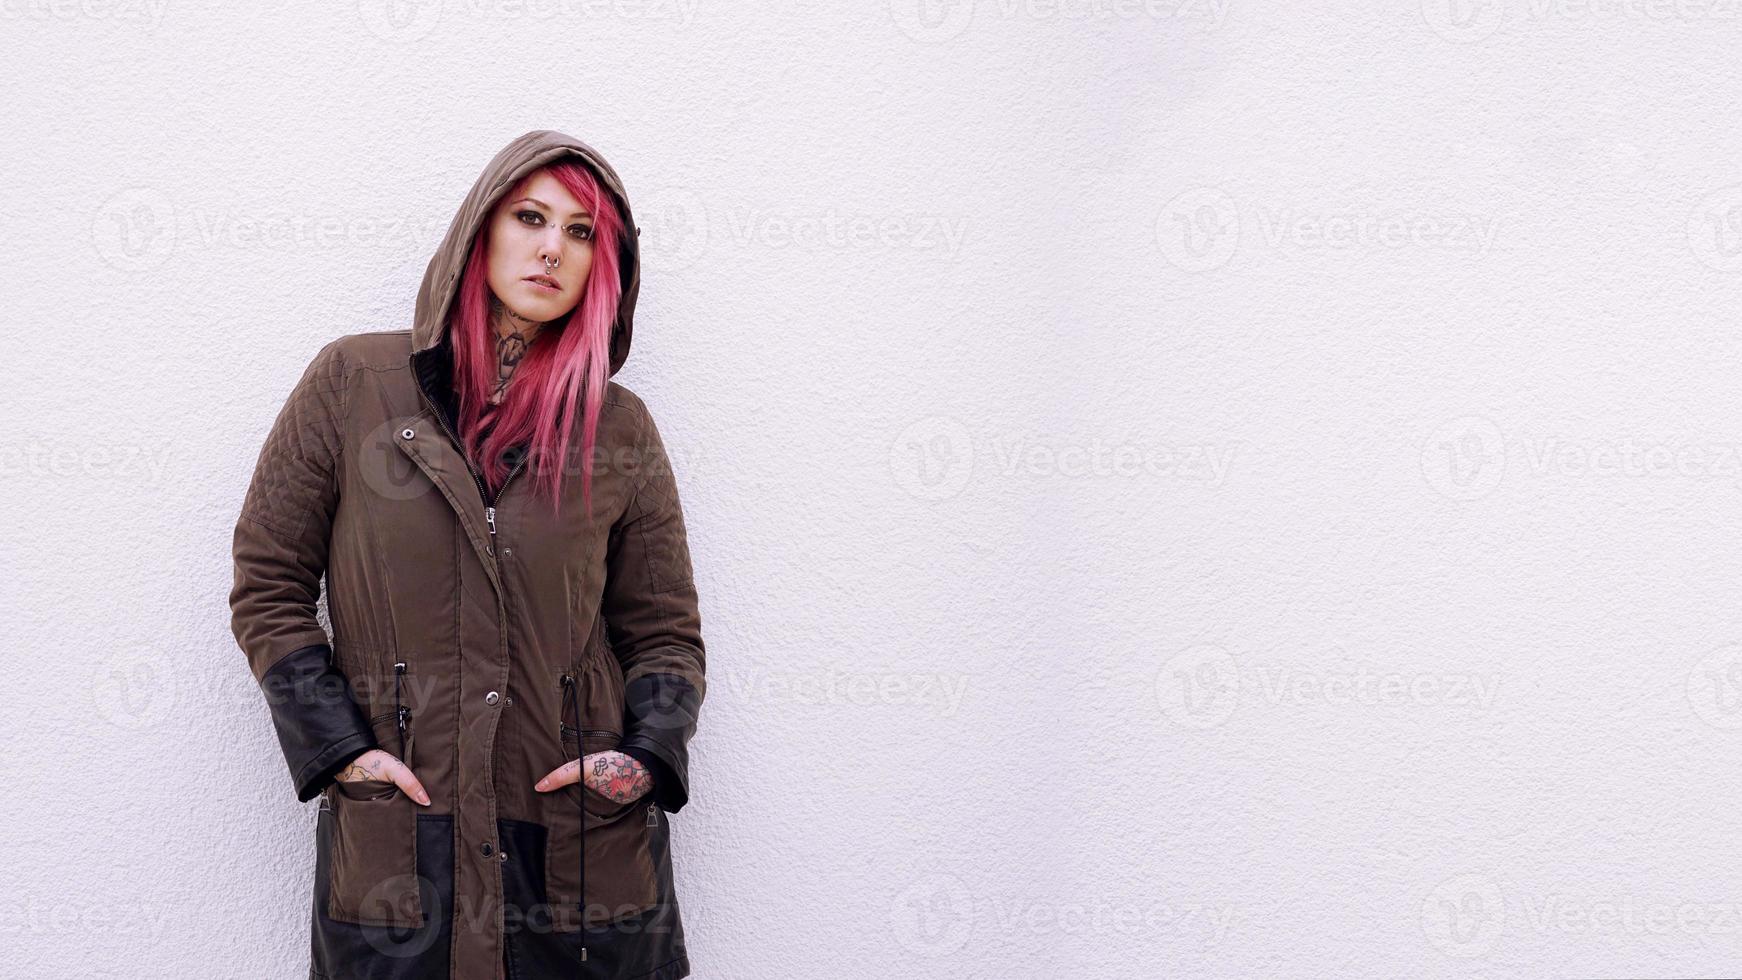 young woman with hooded parka pink hair piercings and tattoos against wall with copy space photo